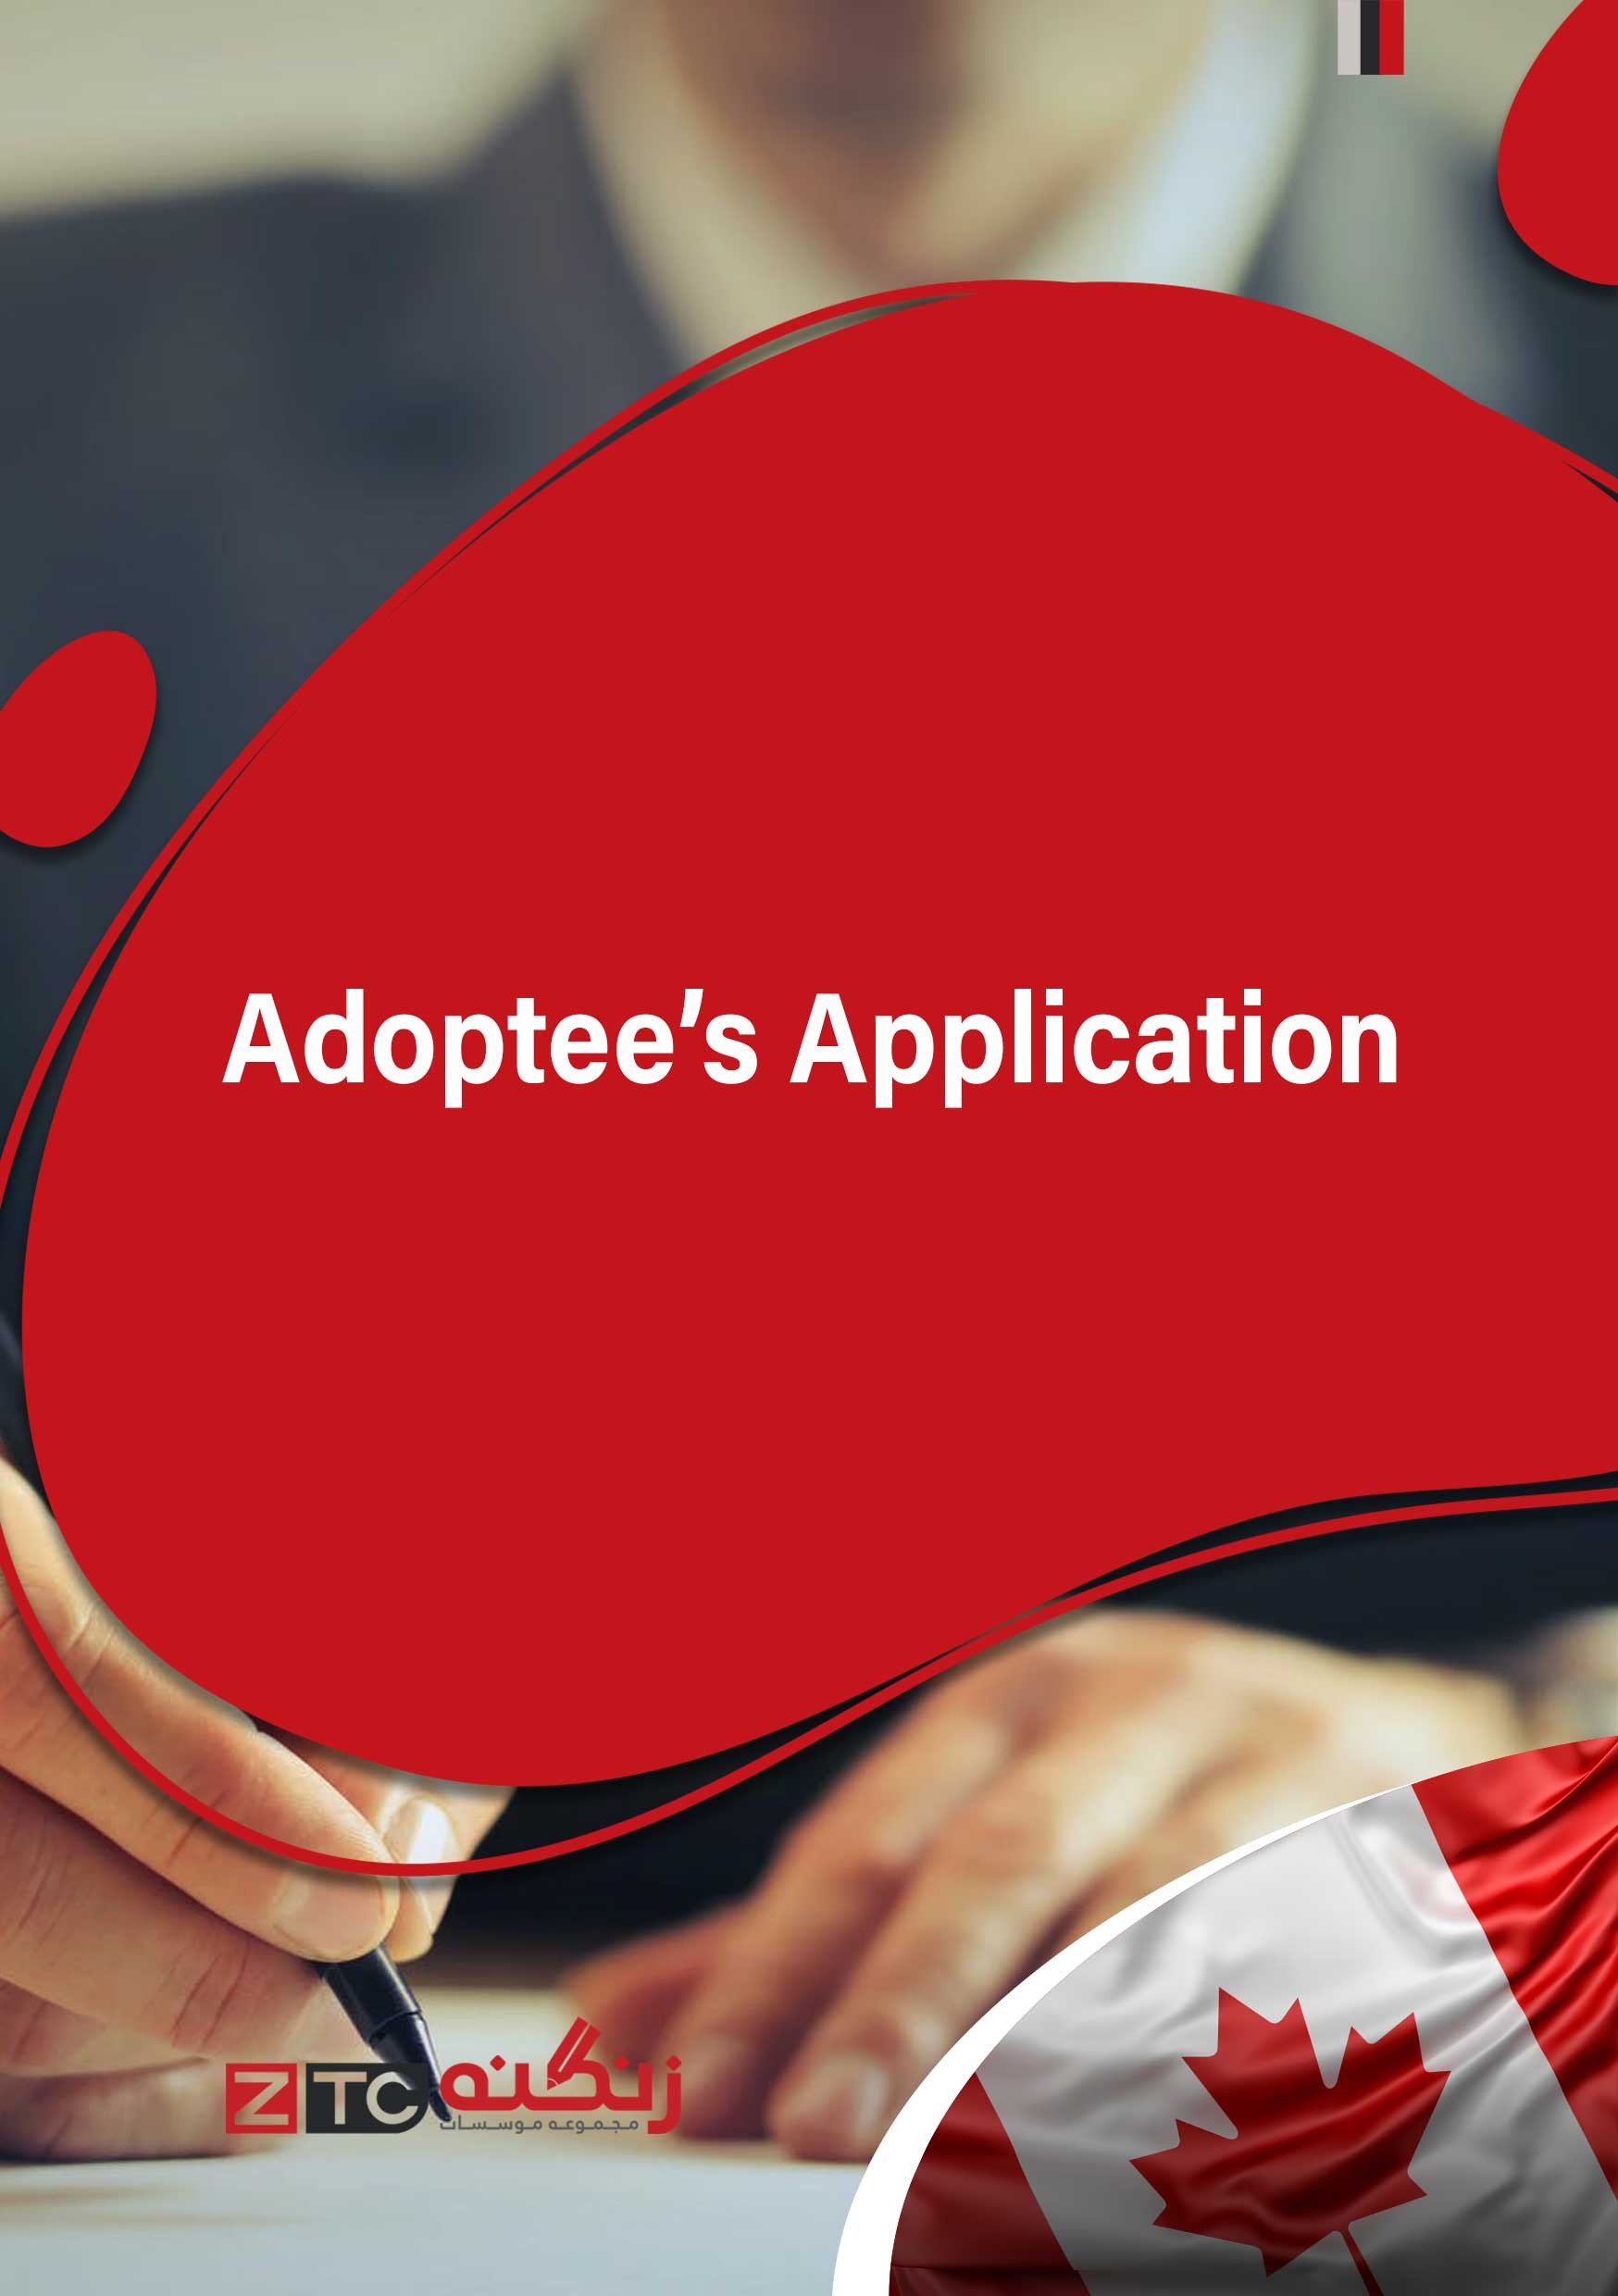 Adoptee’s Application